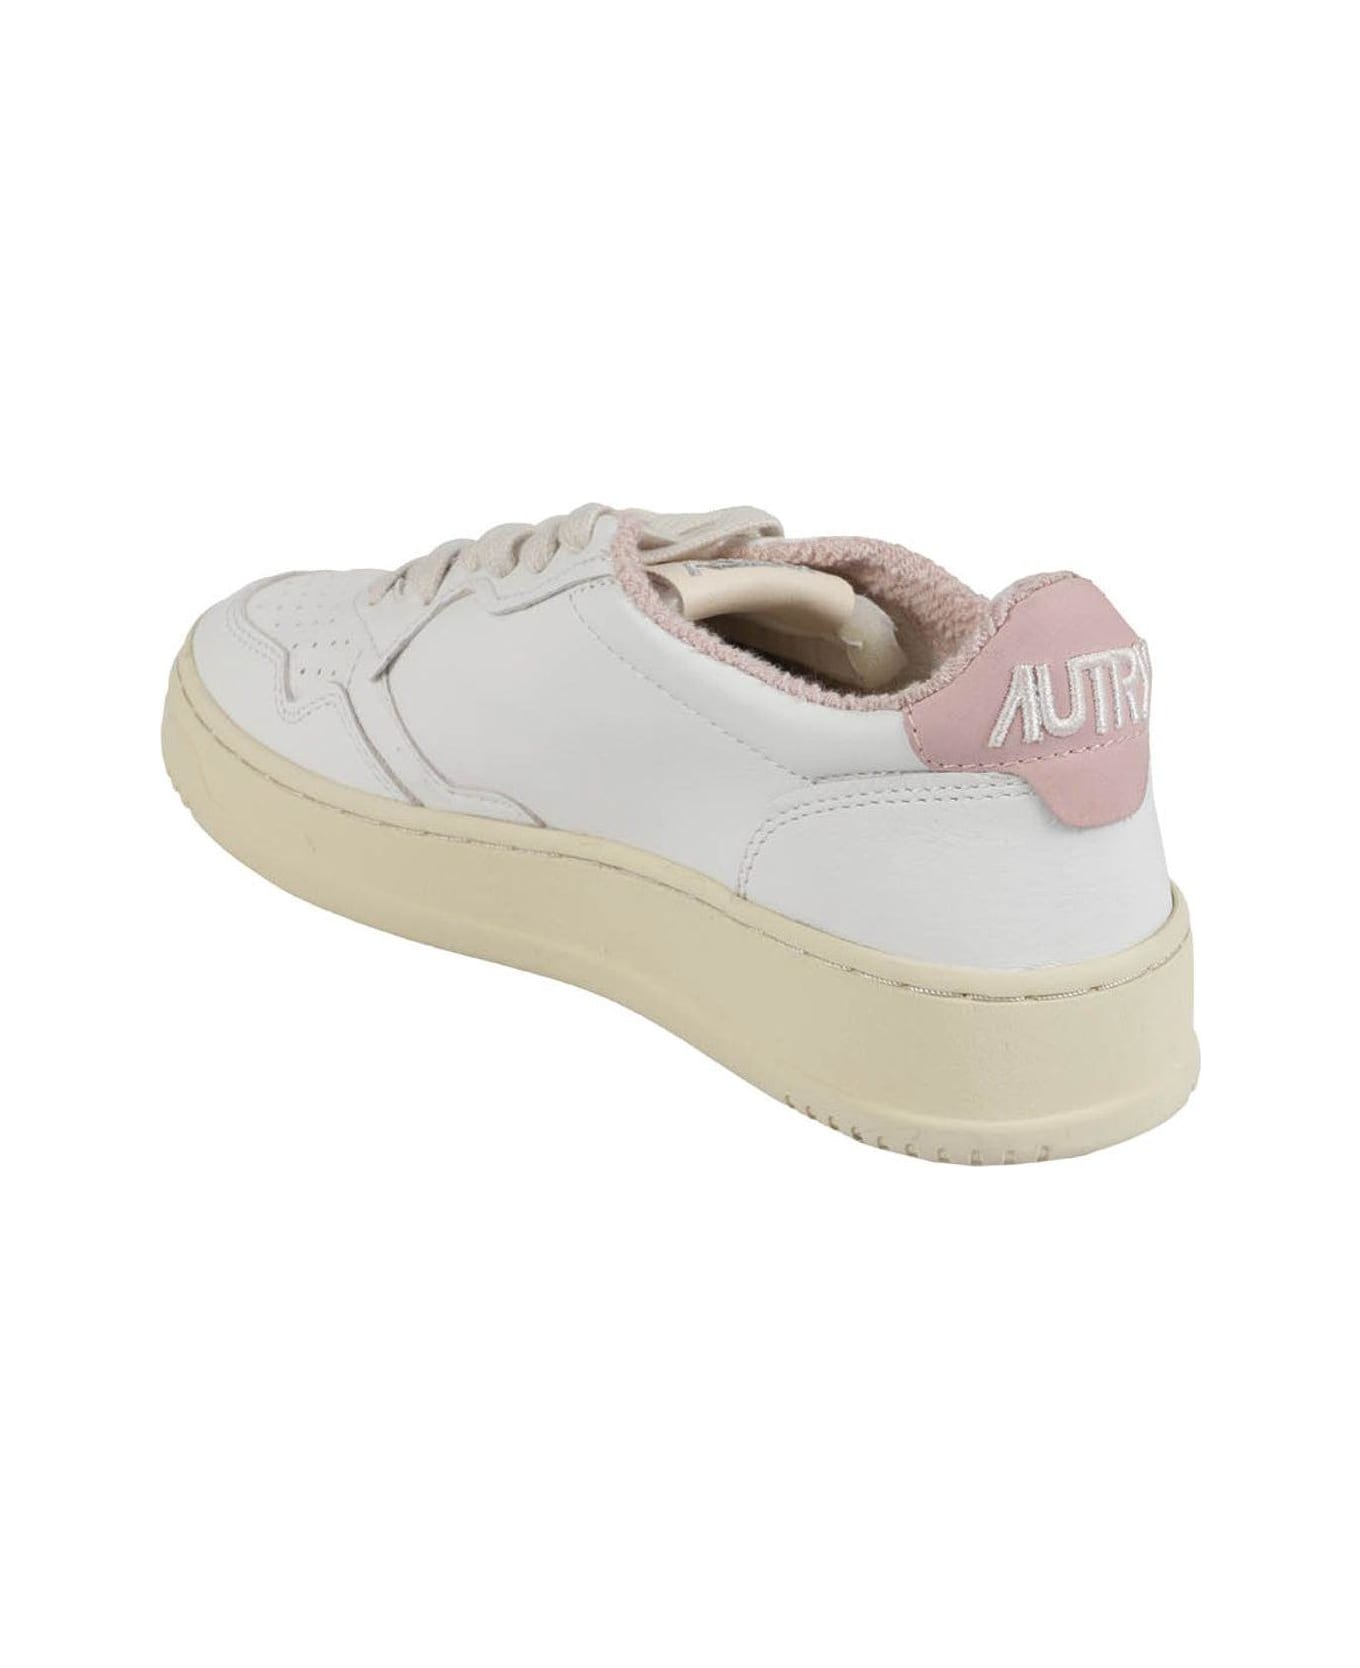 Autry Medalist Low Wom Sneakers - White Powder スニーカー